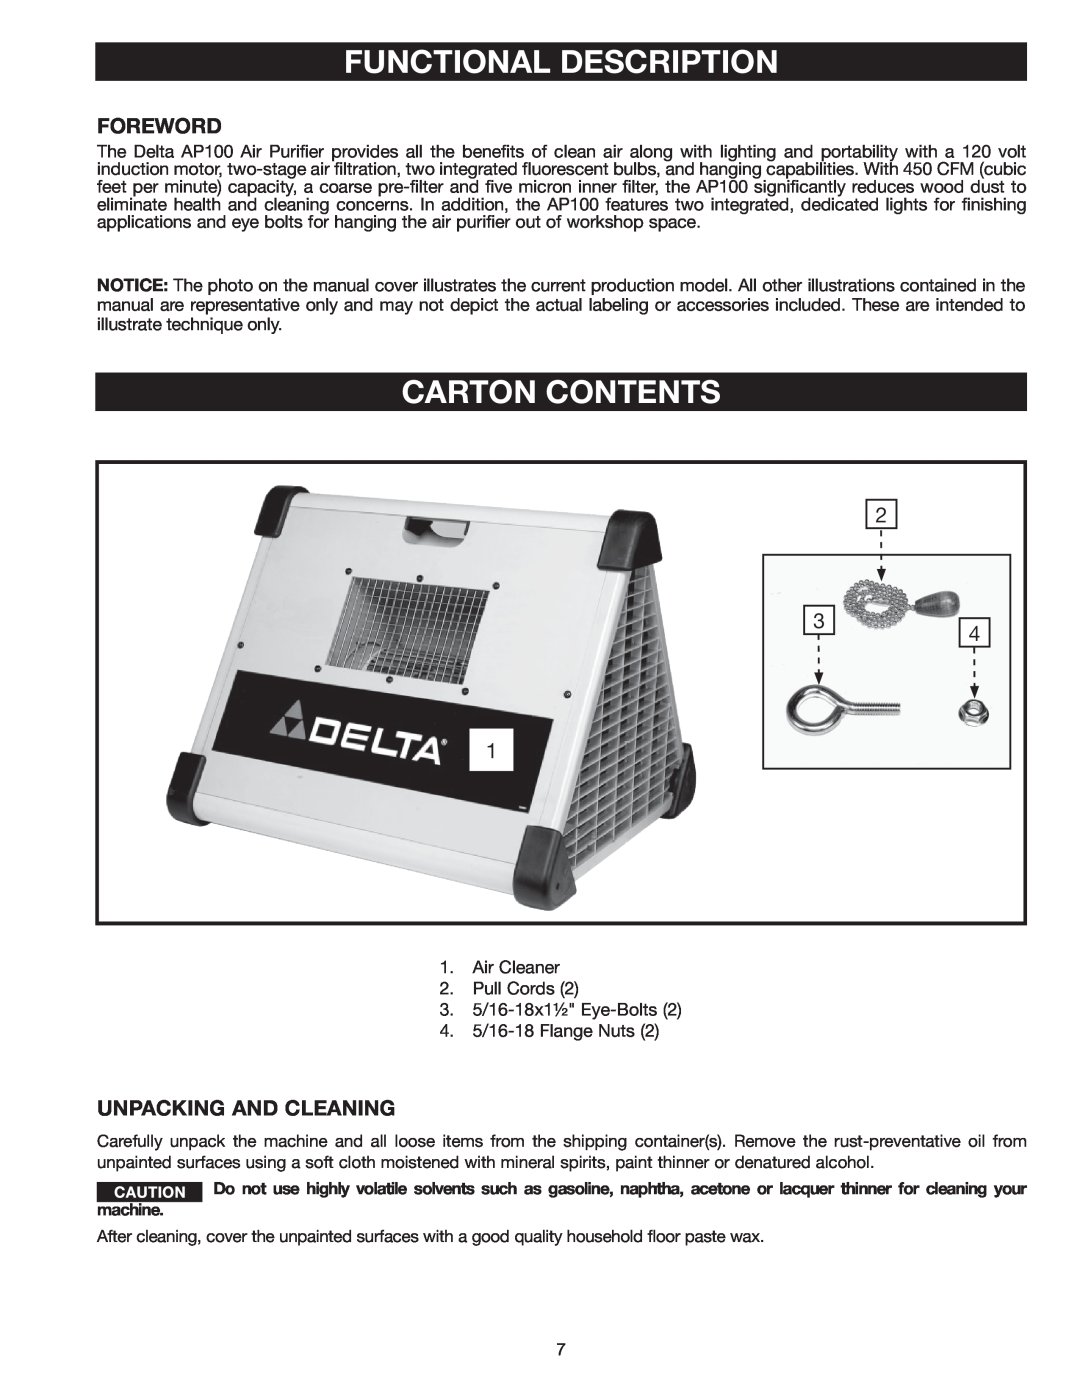 Delta AP-100 instruction manual Functional Description, Carton Contents, Foreword, Unpacking And Cleaning 